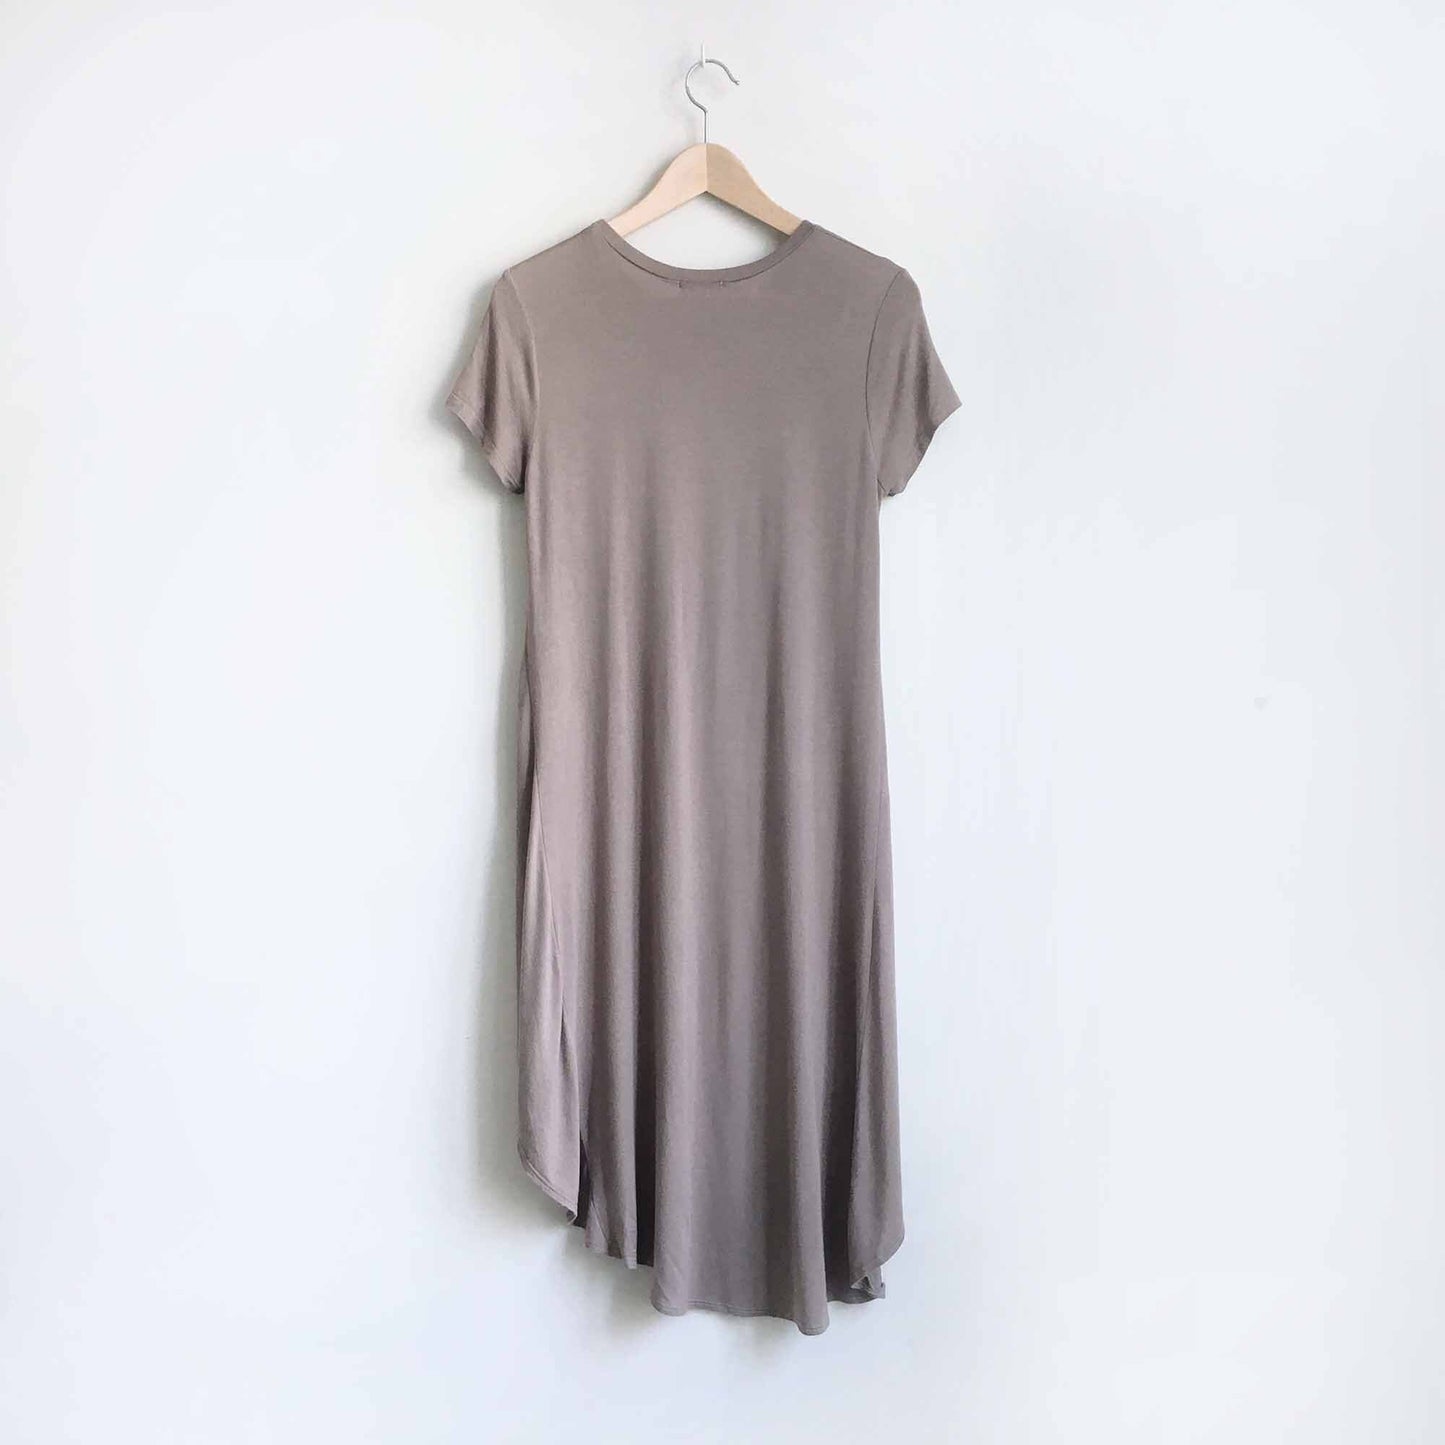 Ooyoo long knotted t-shirt - size Small